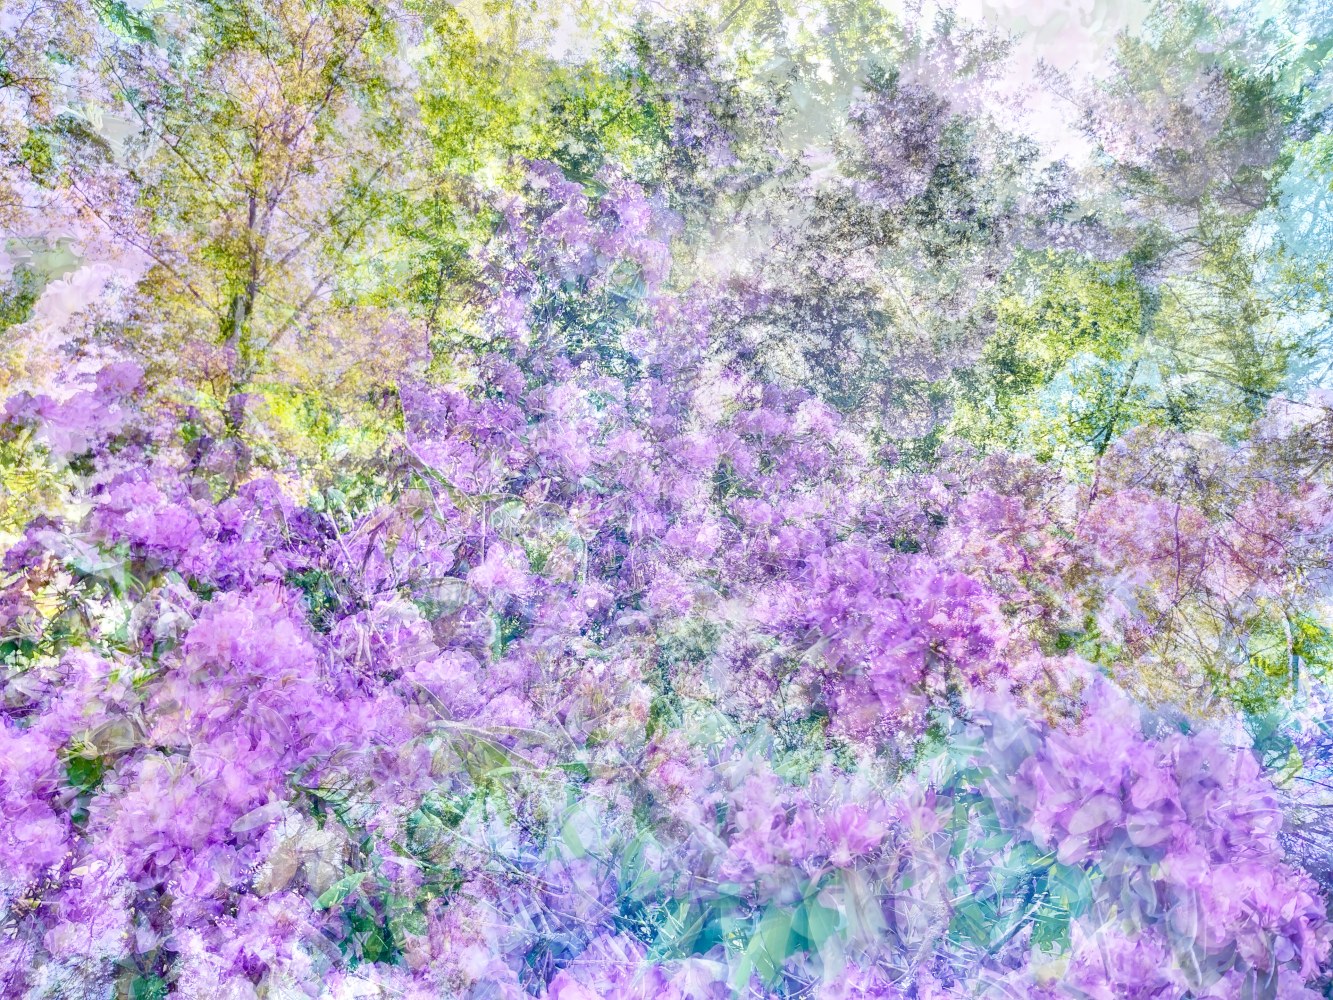 Stephen Wilkes, Spring # 1 Rhododendron Tapestry, 2021